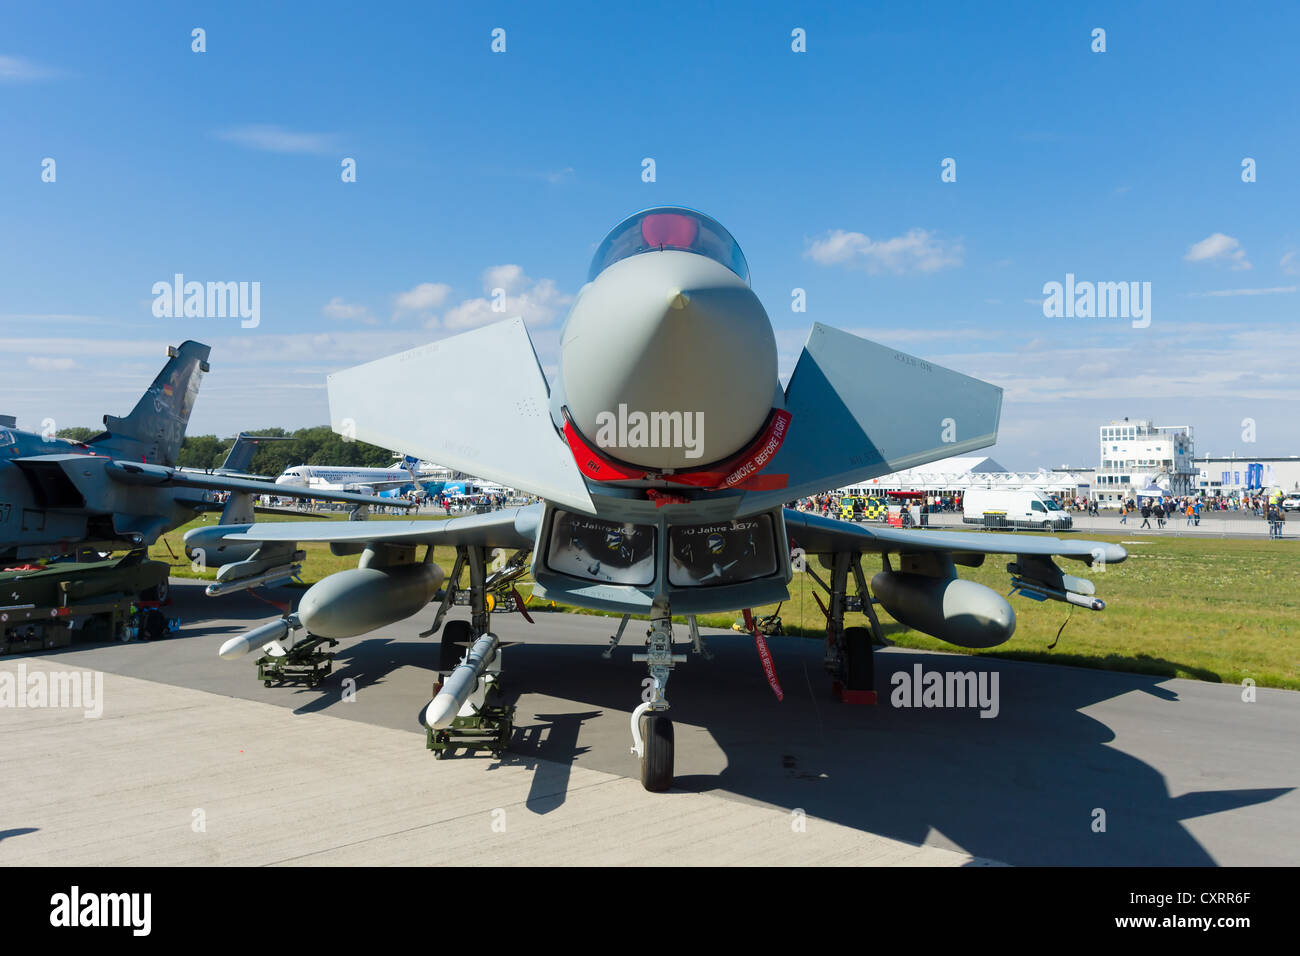 The Eurofighter Typhoon is a twin-engine, canard-delta wing, multirole fighter Stock Photo